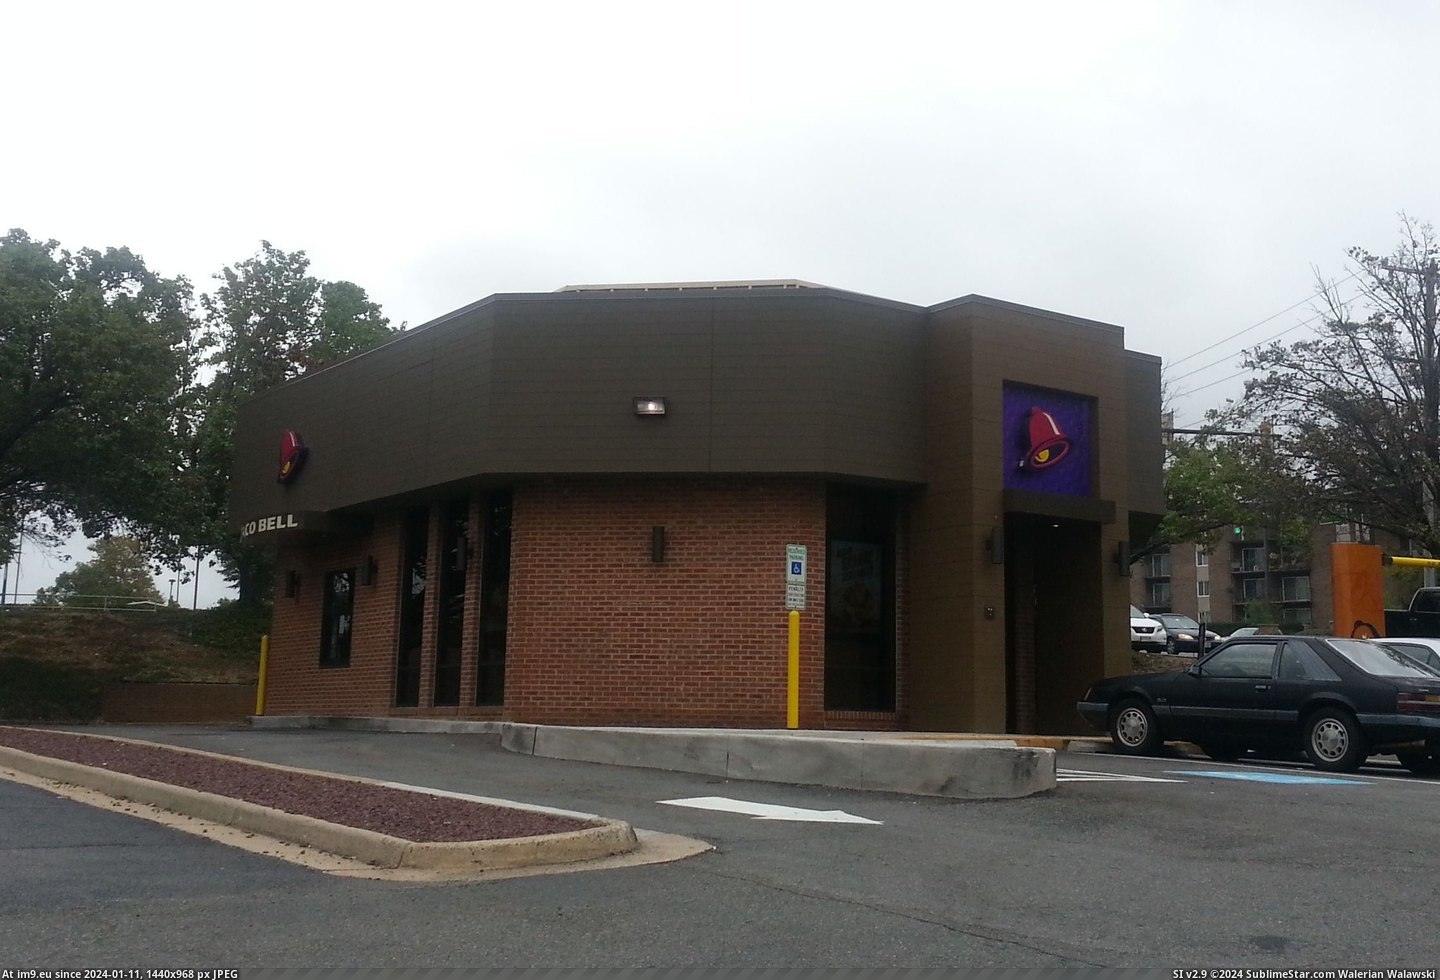 #Bell #Taco #Bank [Mildlyinteresting] This Taco Bell used to be a bank Pic. (Изображение из альбом My r/MILDLYINTERESTING favs))